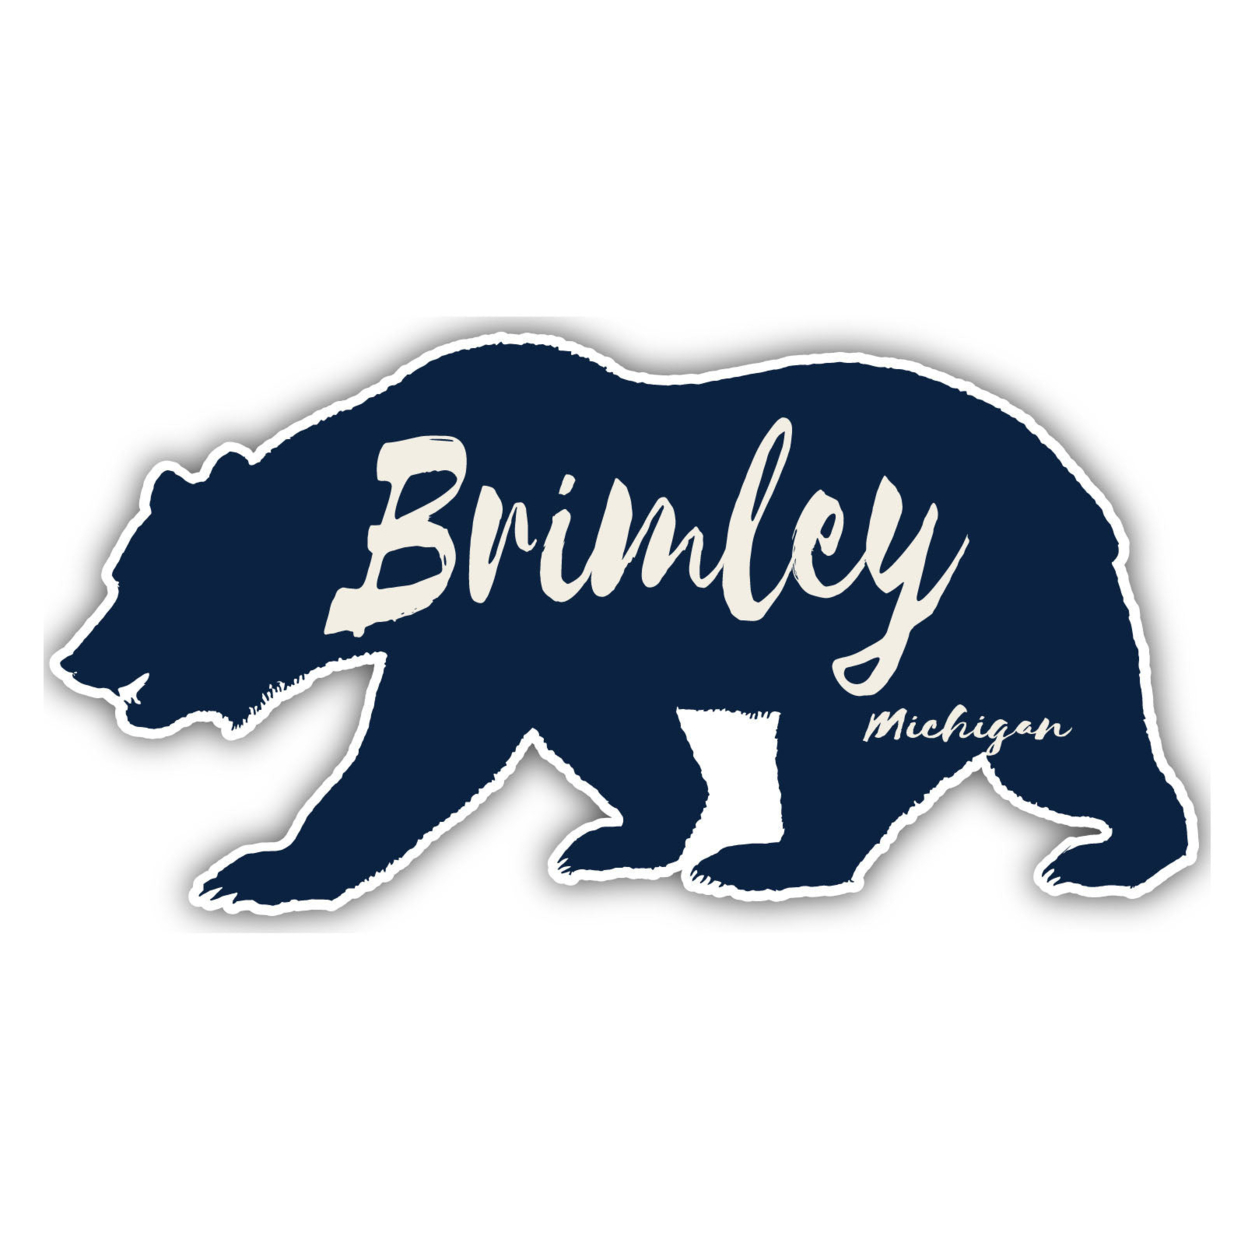 Brimley Michigan Souvenir Decorative Stickers (Choose Theme And Size) - 4-Pack, 4-Inch, Bear